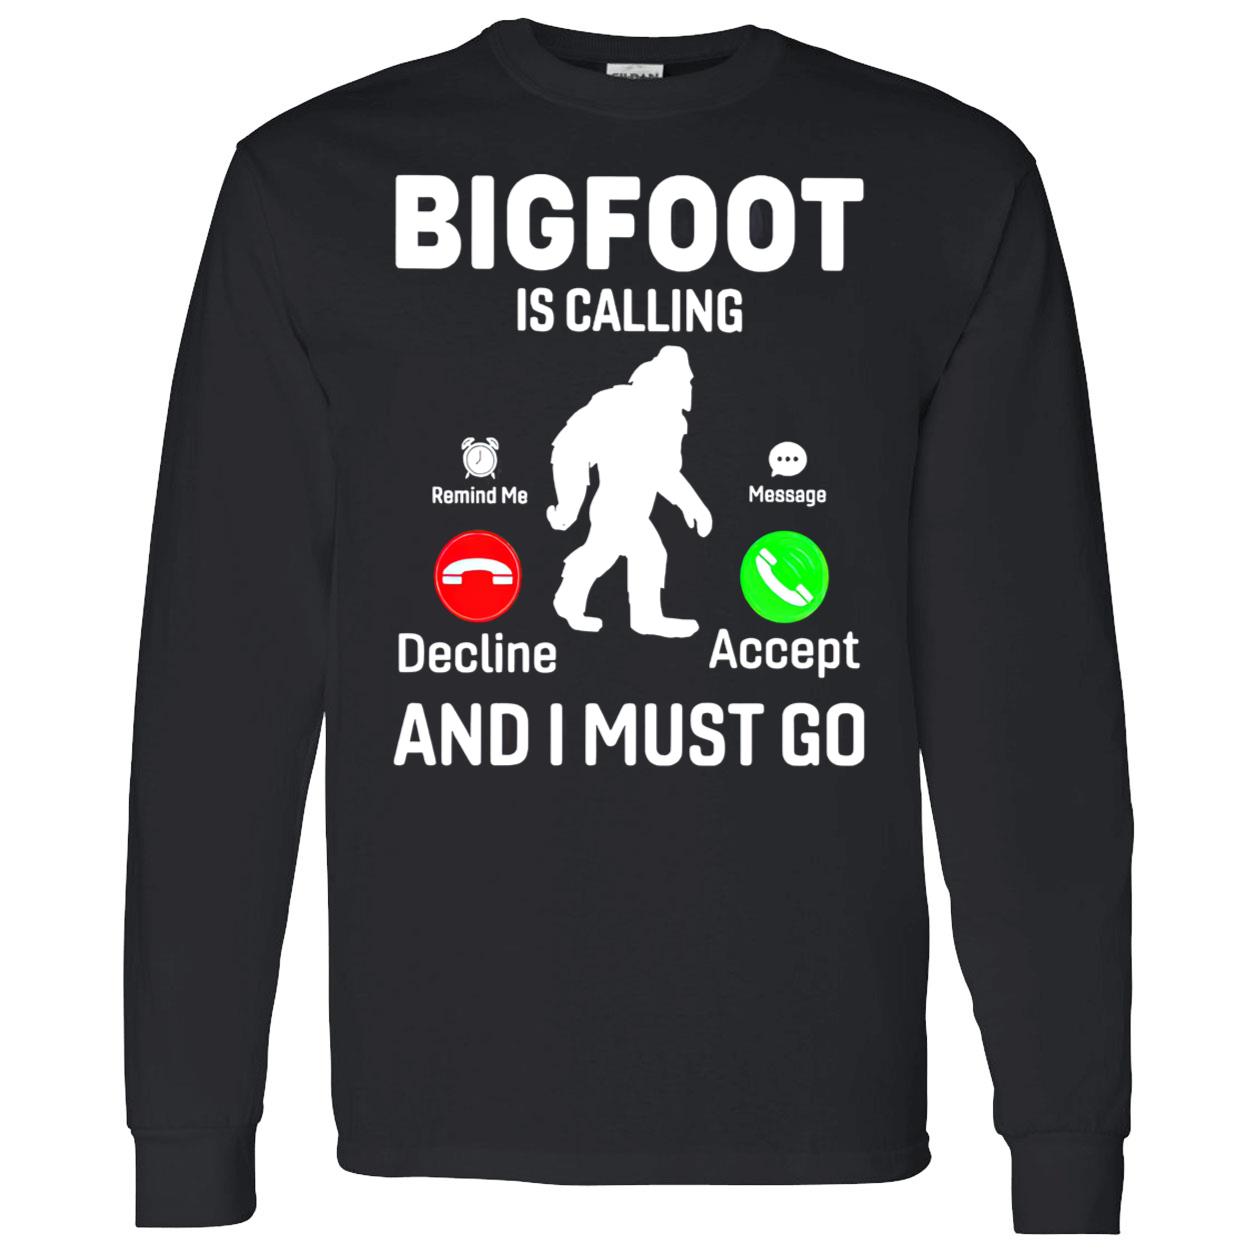 Bigfoot Is Calling And I Must Go Shirt